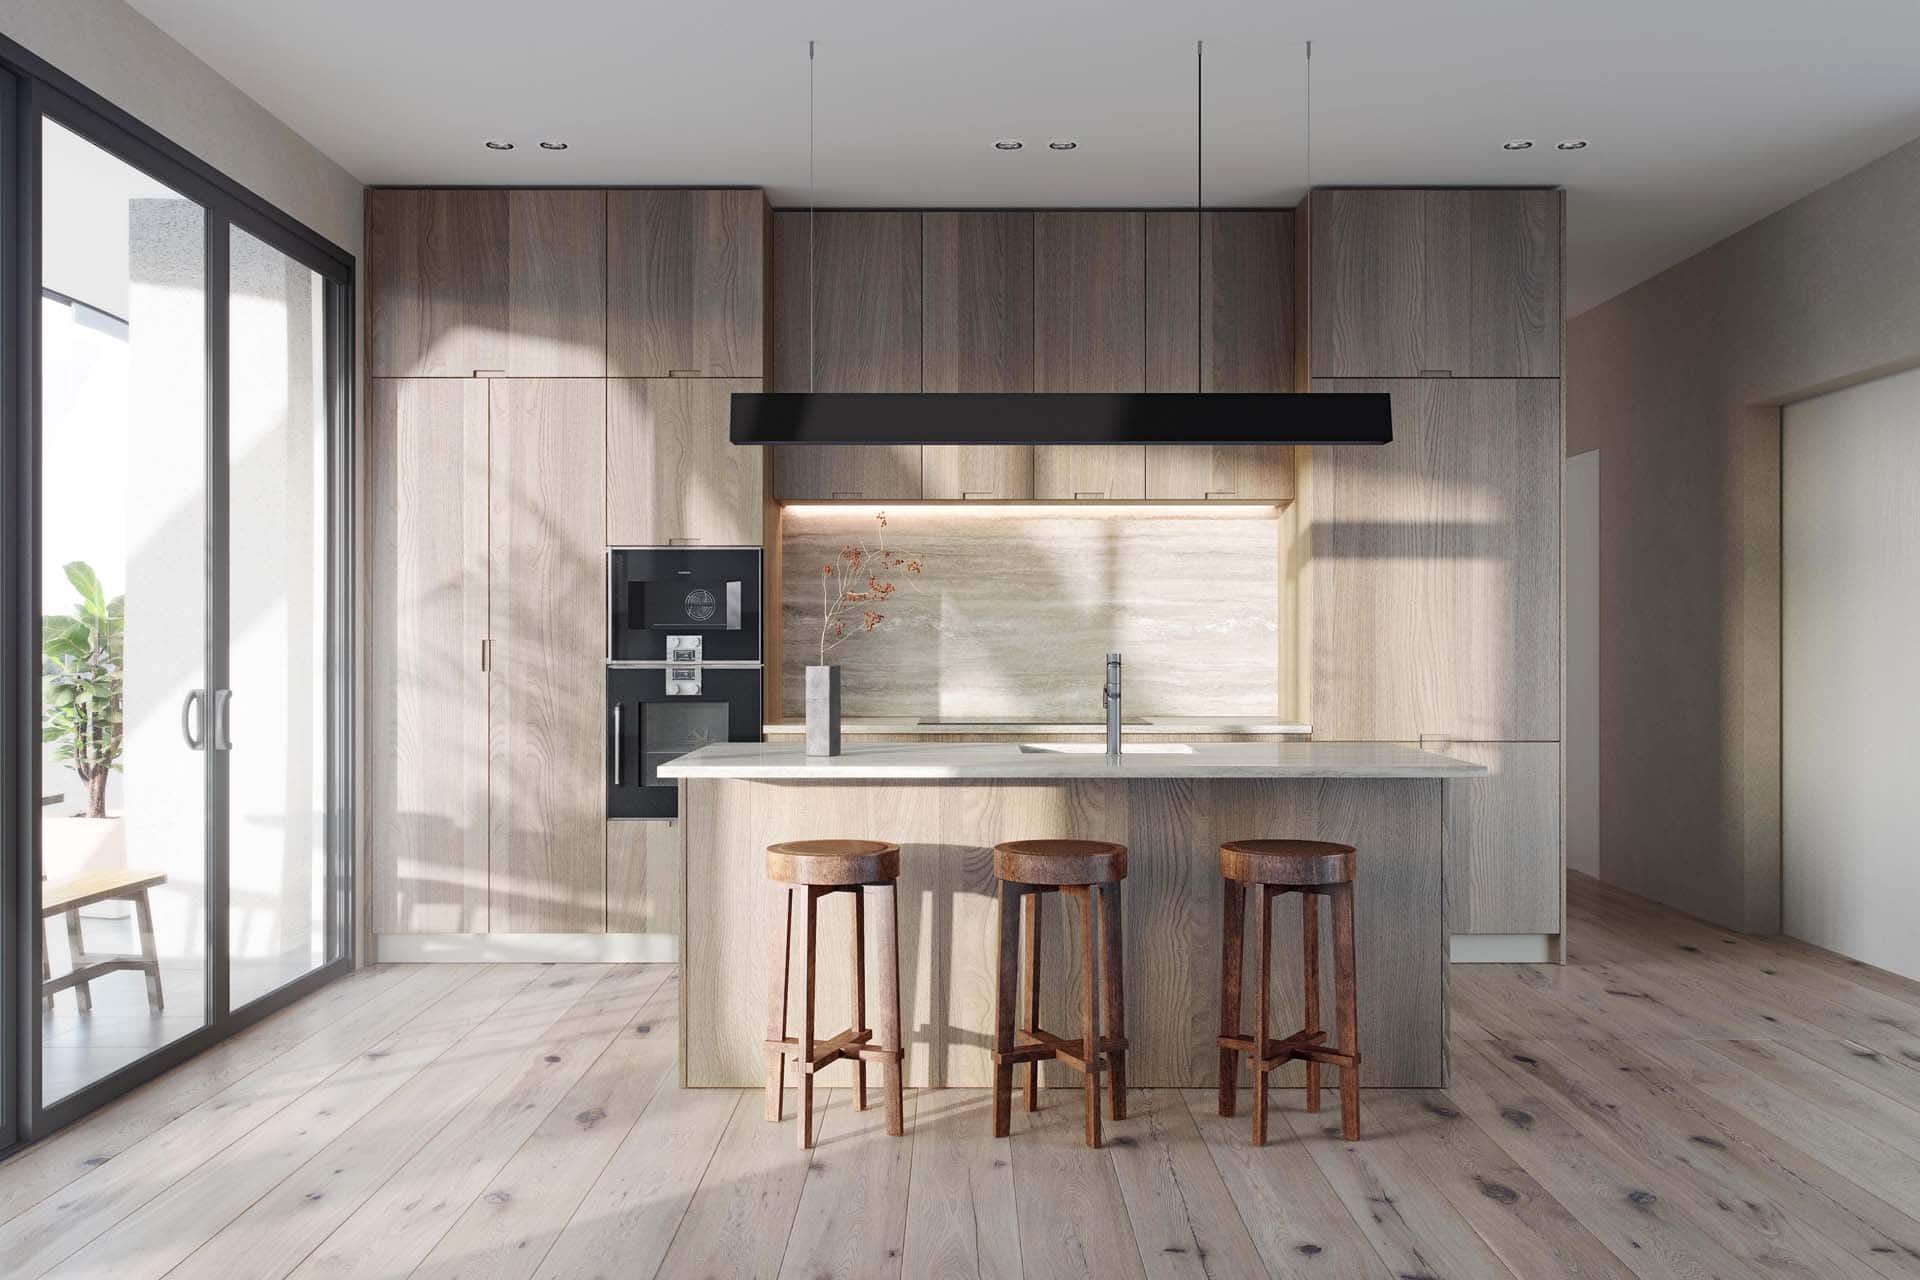 Interior designer Rufus Knight is bringing a neutral palette of luxurious natural materials, as well as premium kitchens and bathrooms by Italian specialists Boffi. 